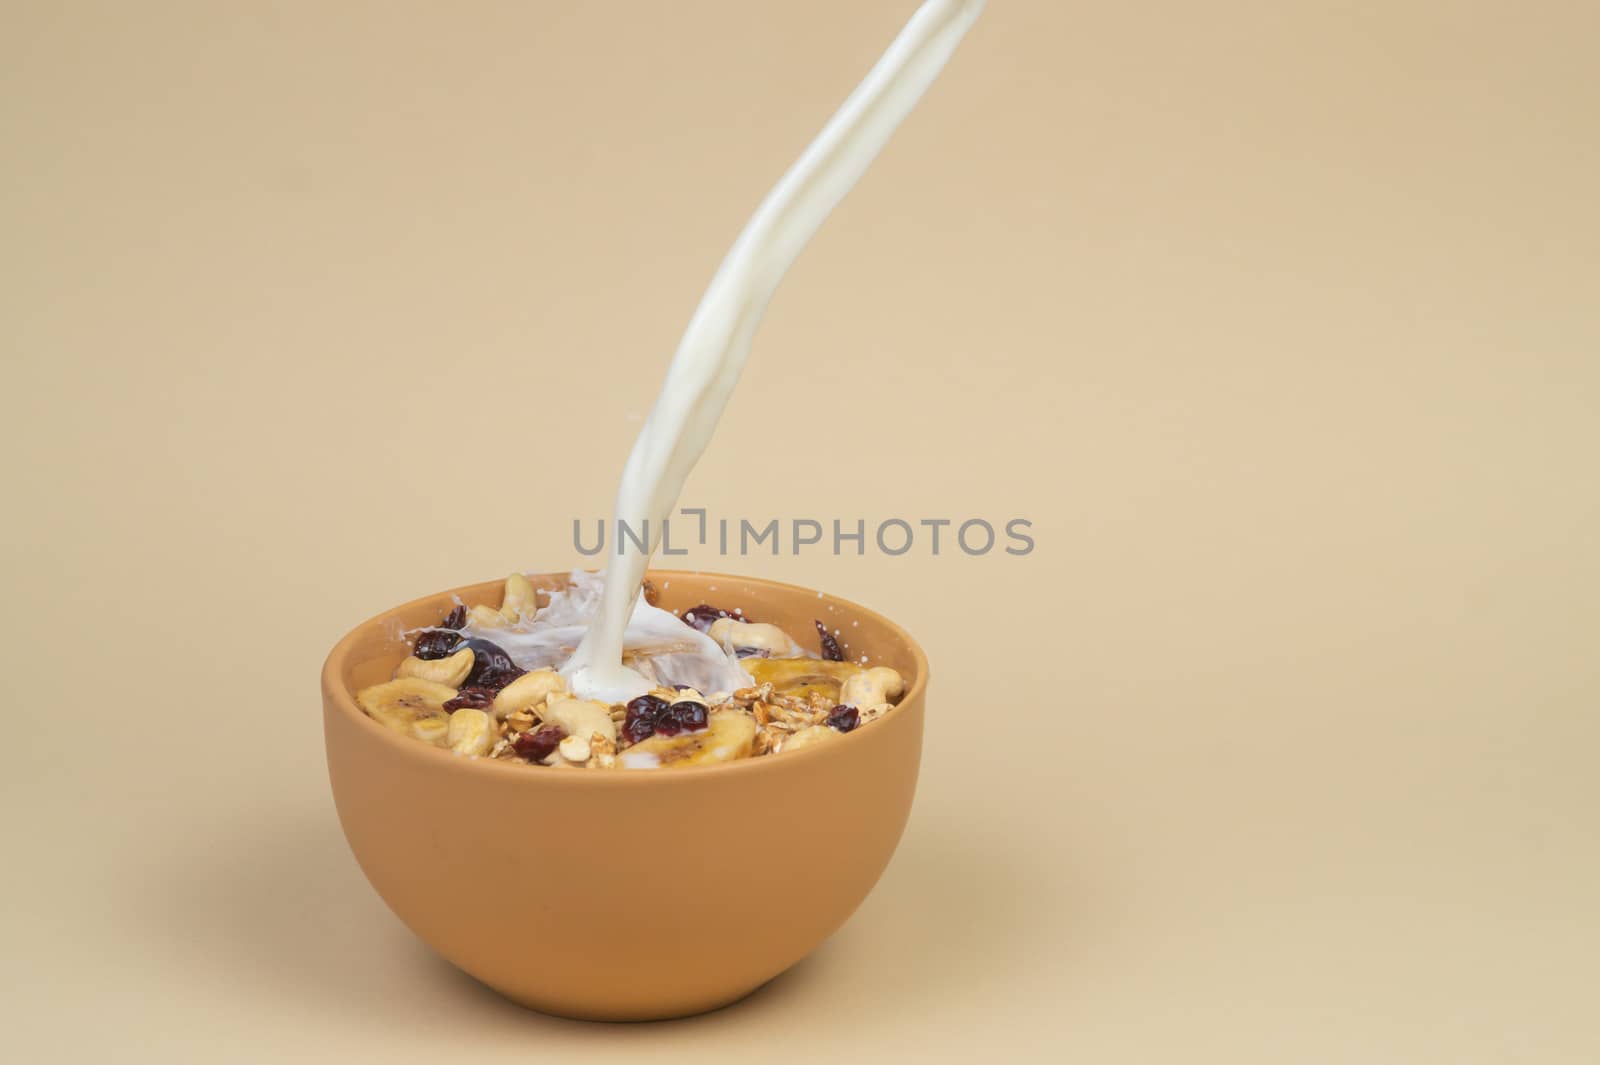 A stream og milk pours onto granola with dried and candied fruits and nuts in beige colour bowl. Bowl on a beige background. Concept of nutrient and healty breakfast or meal